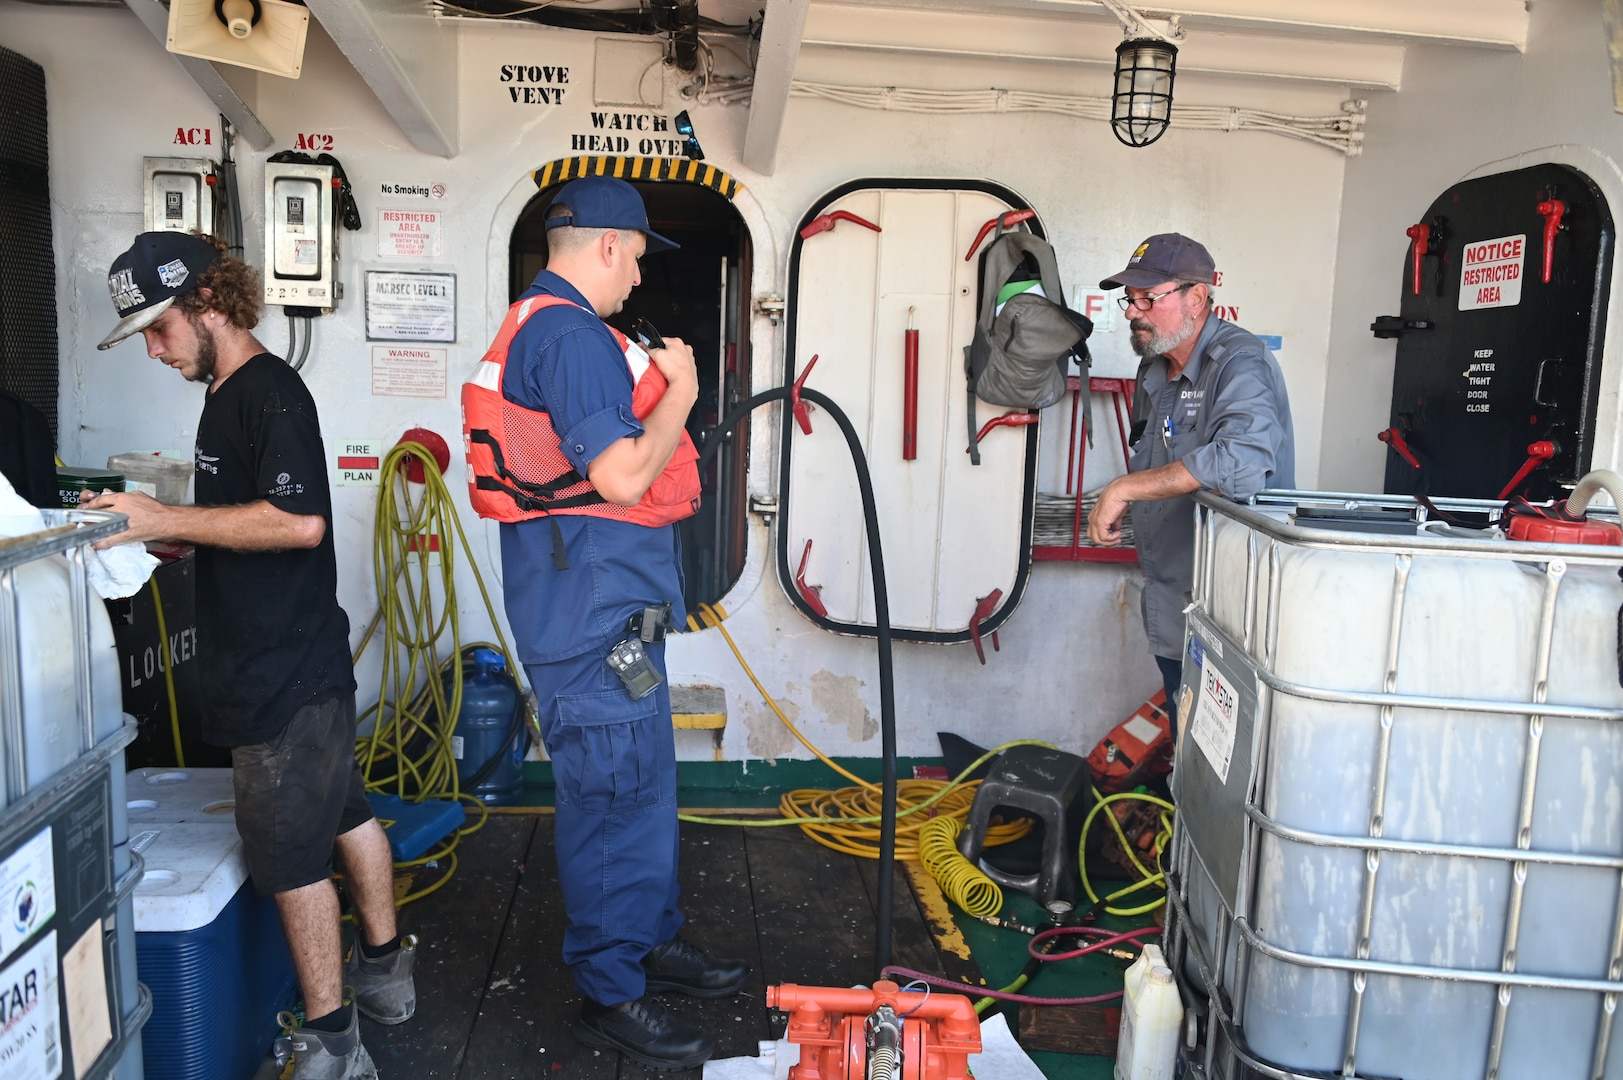 Coast Guard Incident Commander Lt. Cmdr. Christopher O'Conner is briefed by Robert Weihe, a Donjon-Smitt employee on decanting operations on the Bonnie G off Cyril E. King Airport, St. Thomas, Oct. 14, 2023. The Bonnie G, a 195-foot Vanuatu-flagged “ro-ro” cargo vessel that grounded on Oct. 4 during Tropical Storm Philippe. (Coast Guard photo by Petty Officer 1st Class Nicole J. Groll)